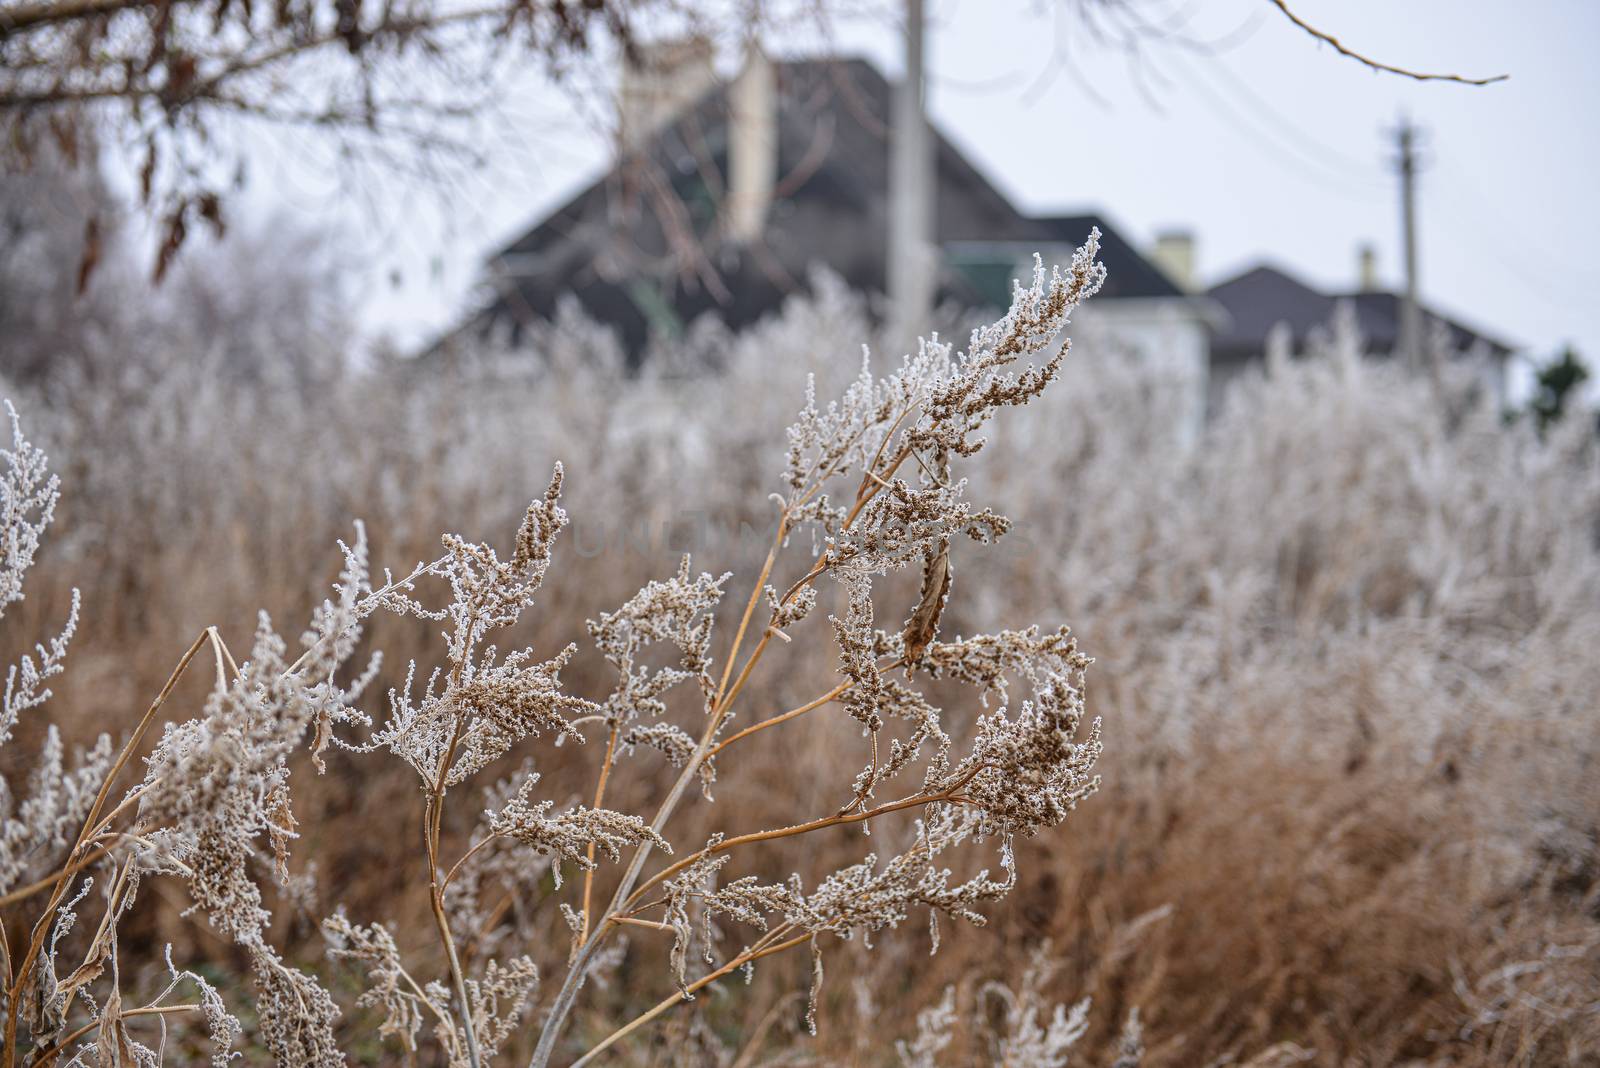 Frozen plants in autumn. Dry flowers covered with the hoar-frost by marynkin